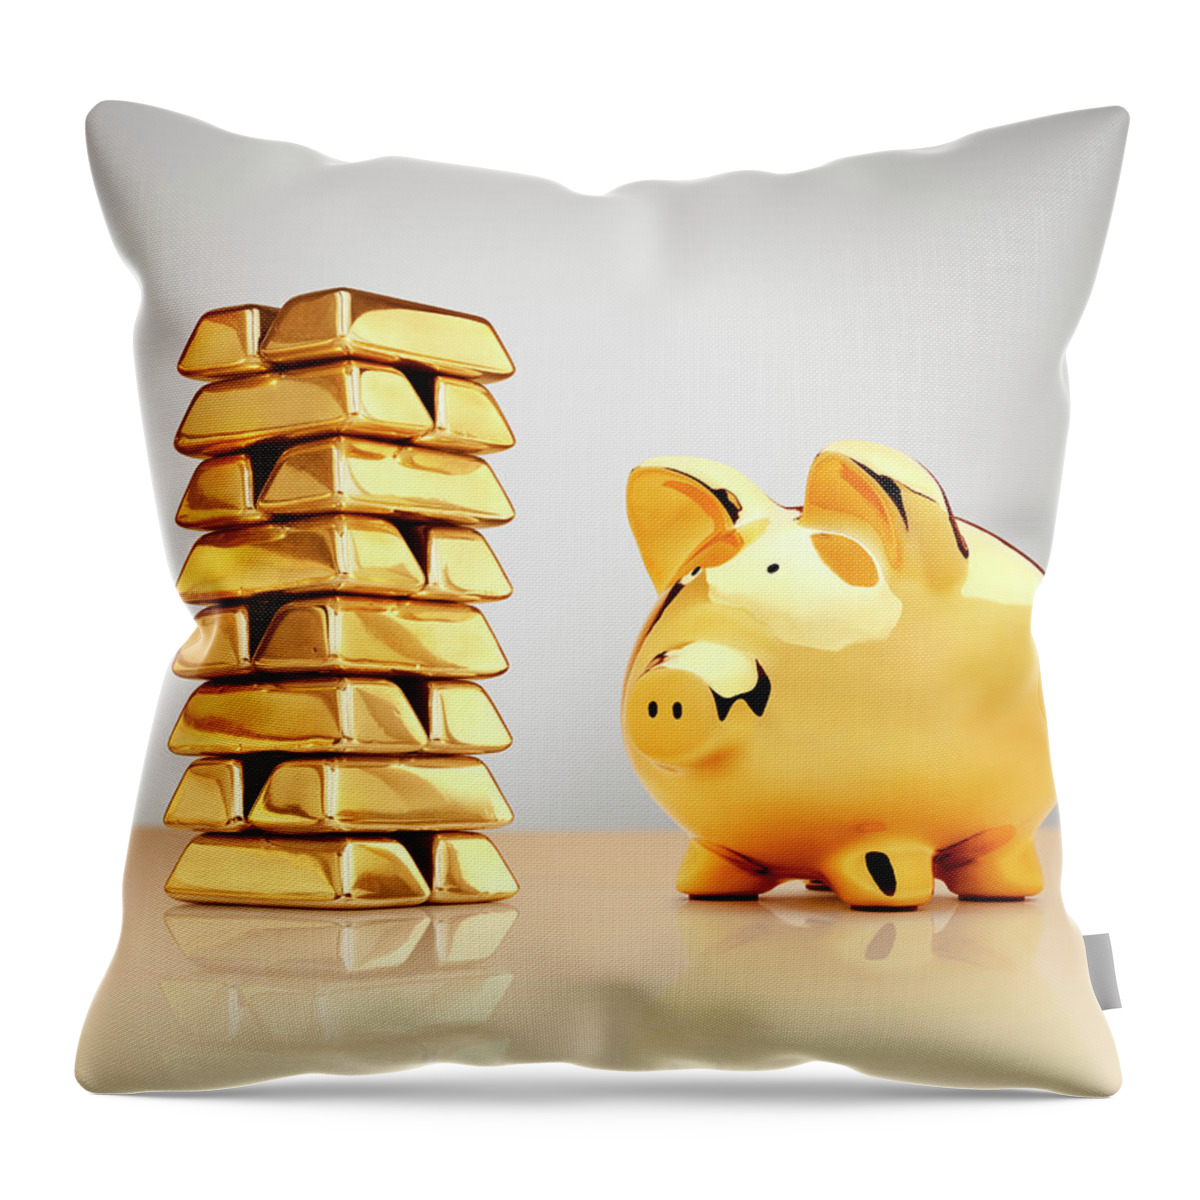 White Background Throw Pillow featuring the photograph Gold Piggy Bank Beside A Stack Of Ingots by Anthony Bradshaw